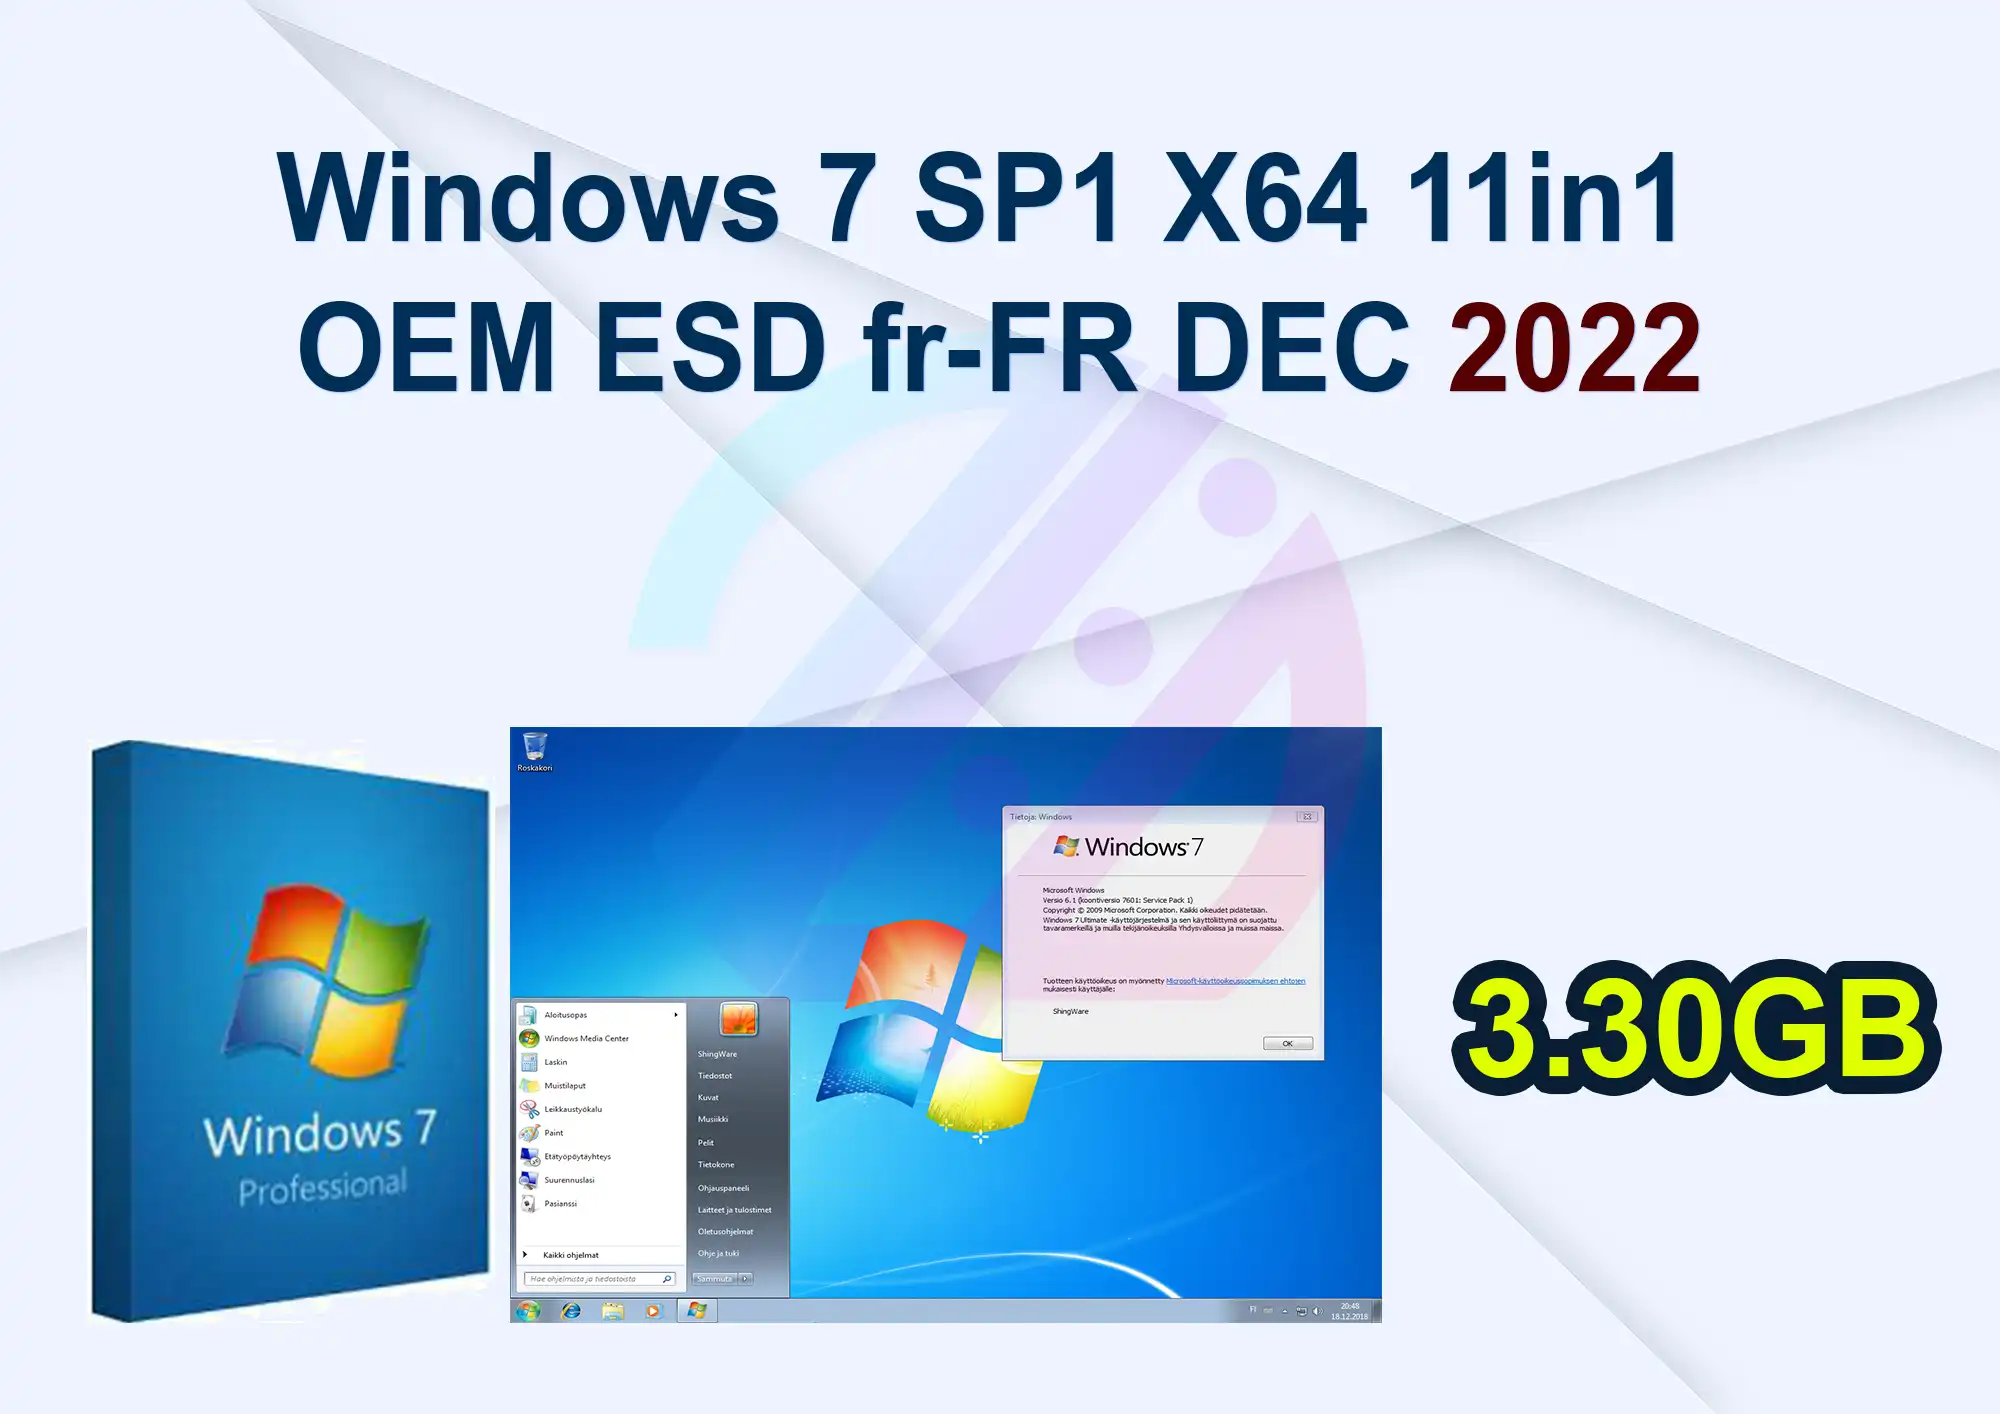 <strong>Windows 7 SP1 X64 11in1 OEM ESD fr-FR DEC 2022</strong>